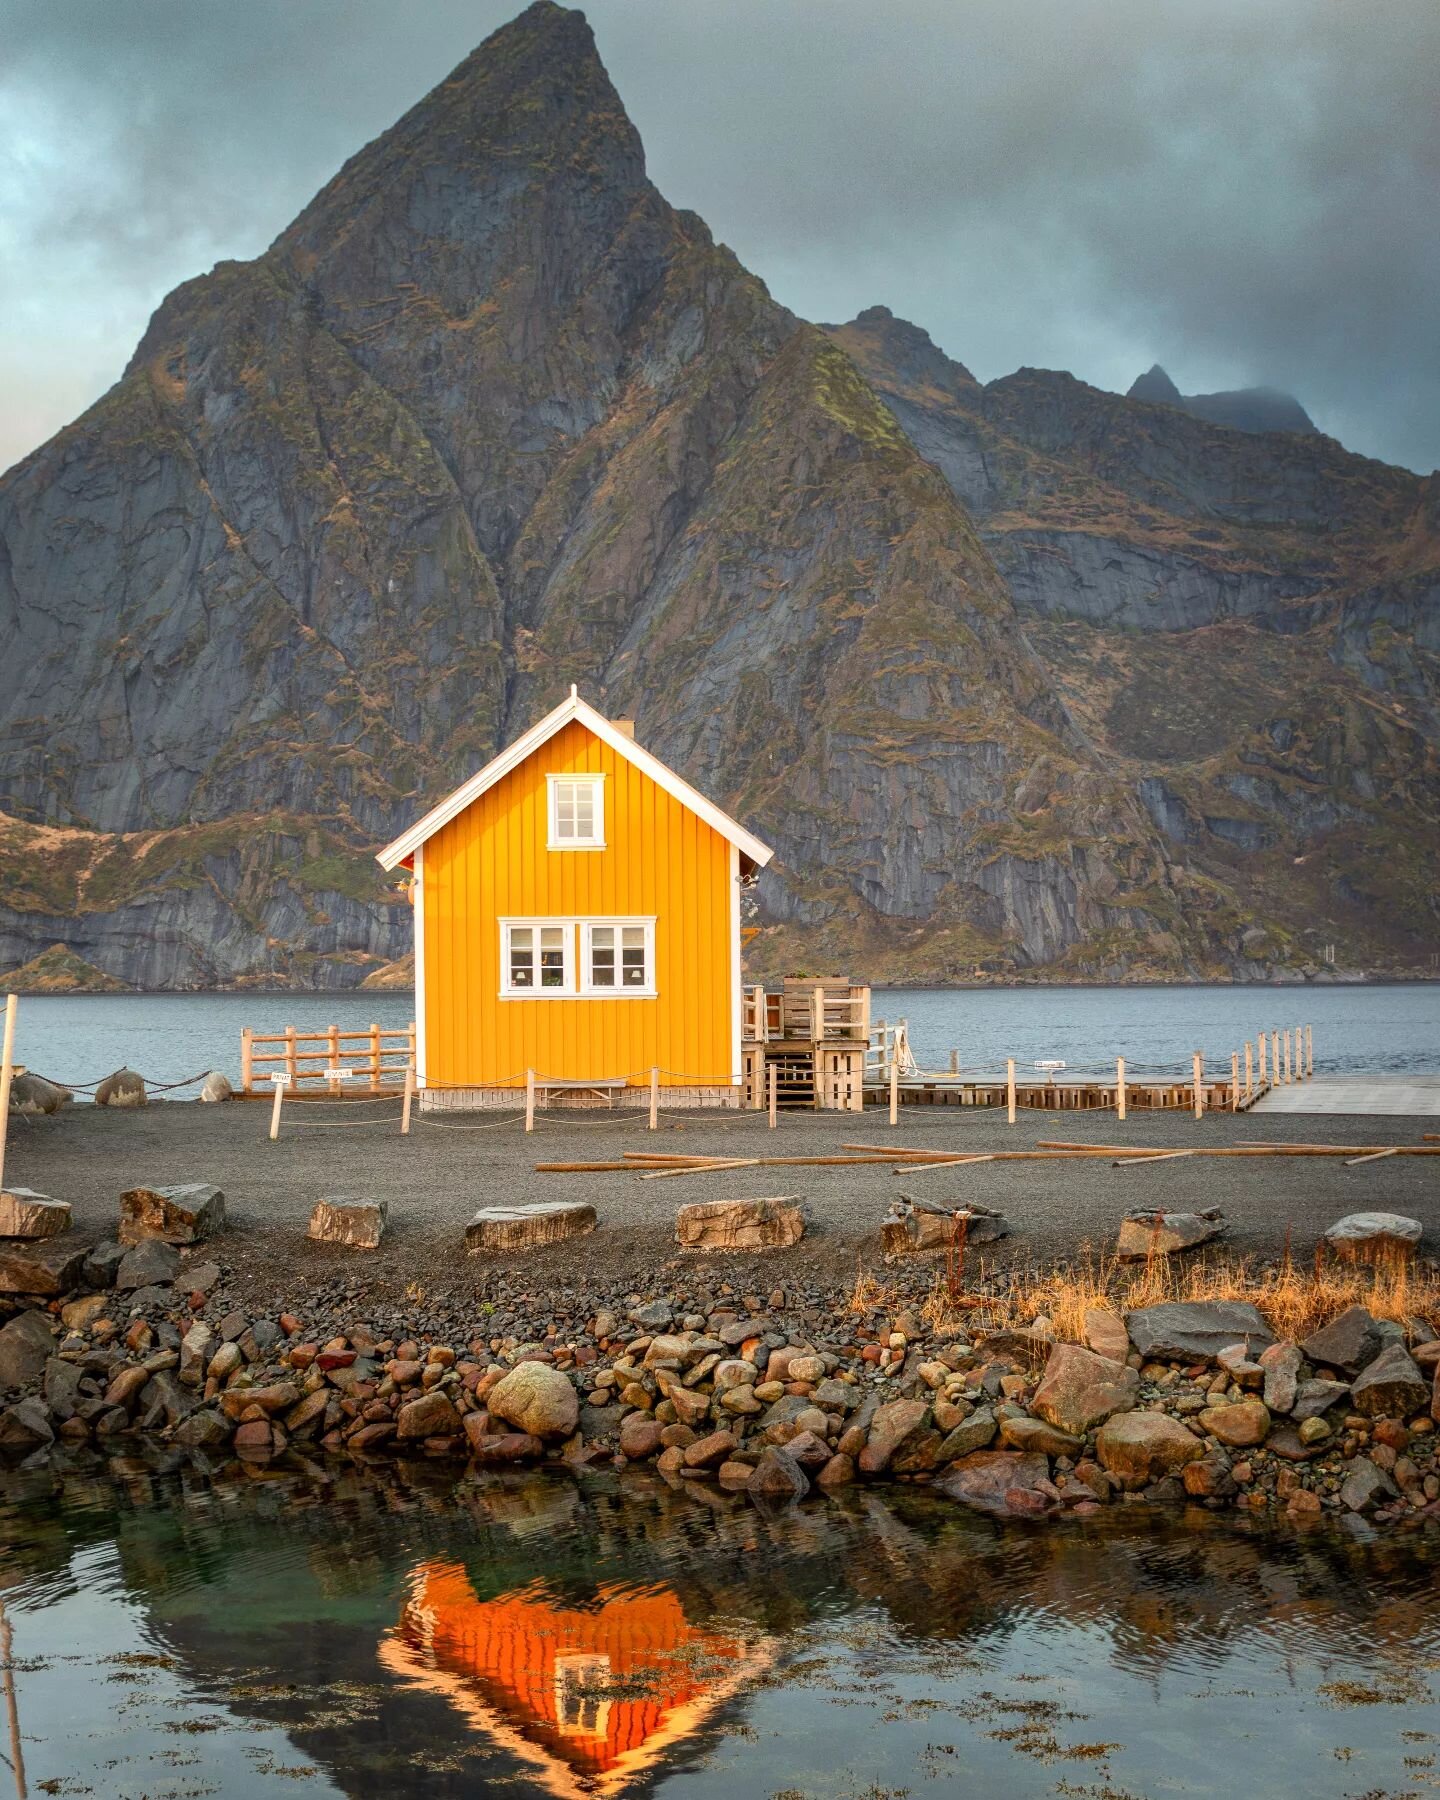 Lofoten's iconic fishing villages, where vibrant red and yellow cabins dot the coastline, offering a picturesque glimpse into Norway's coastal heritage ❤

#norway🇳🇴 #norwaytravel #visitnorway #lofotenonly #lofotenislands #visitlofotenislands #trave